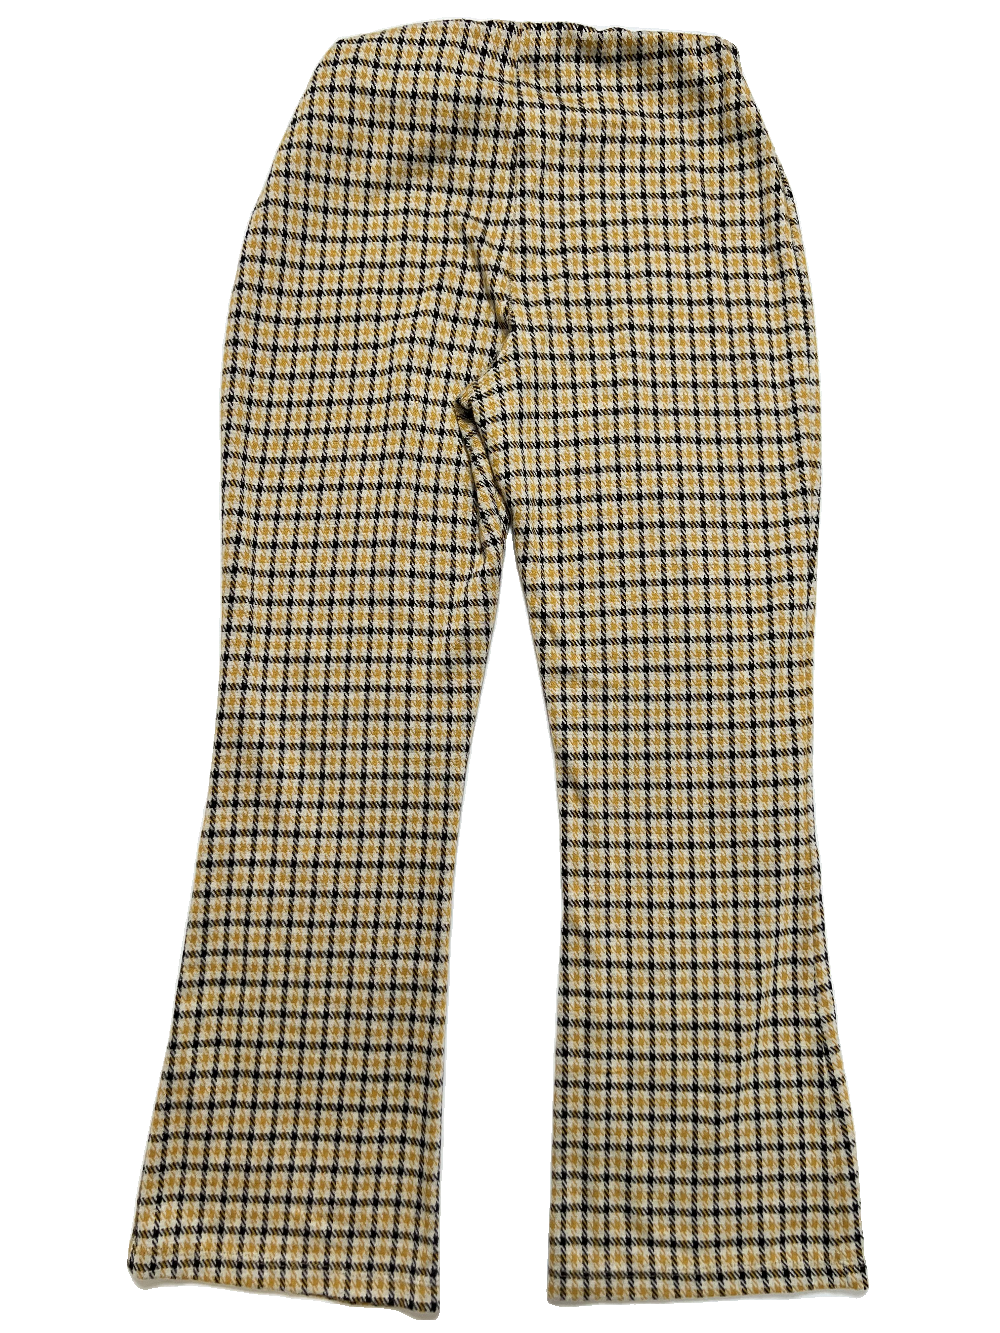 Urban Outfitters - Yellow Flare Pants